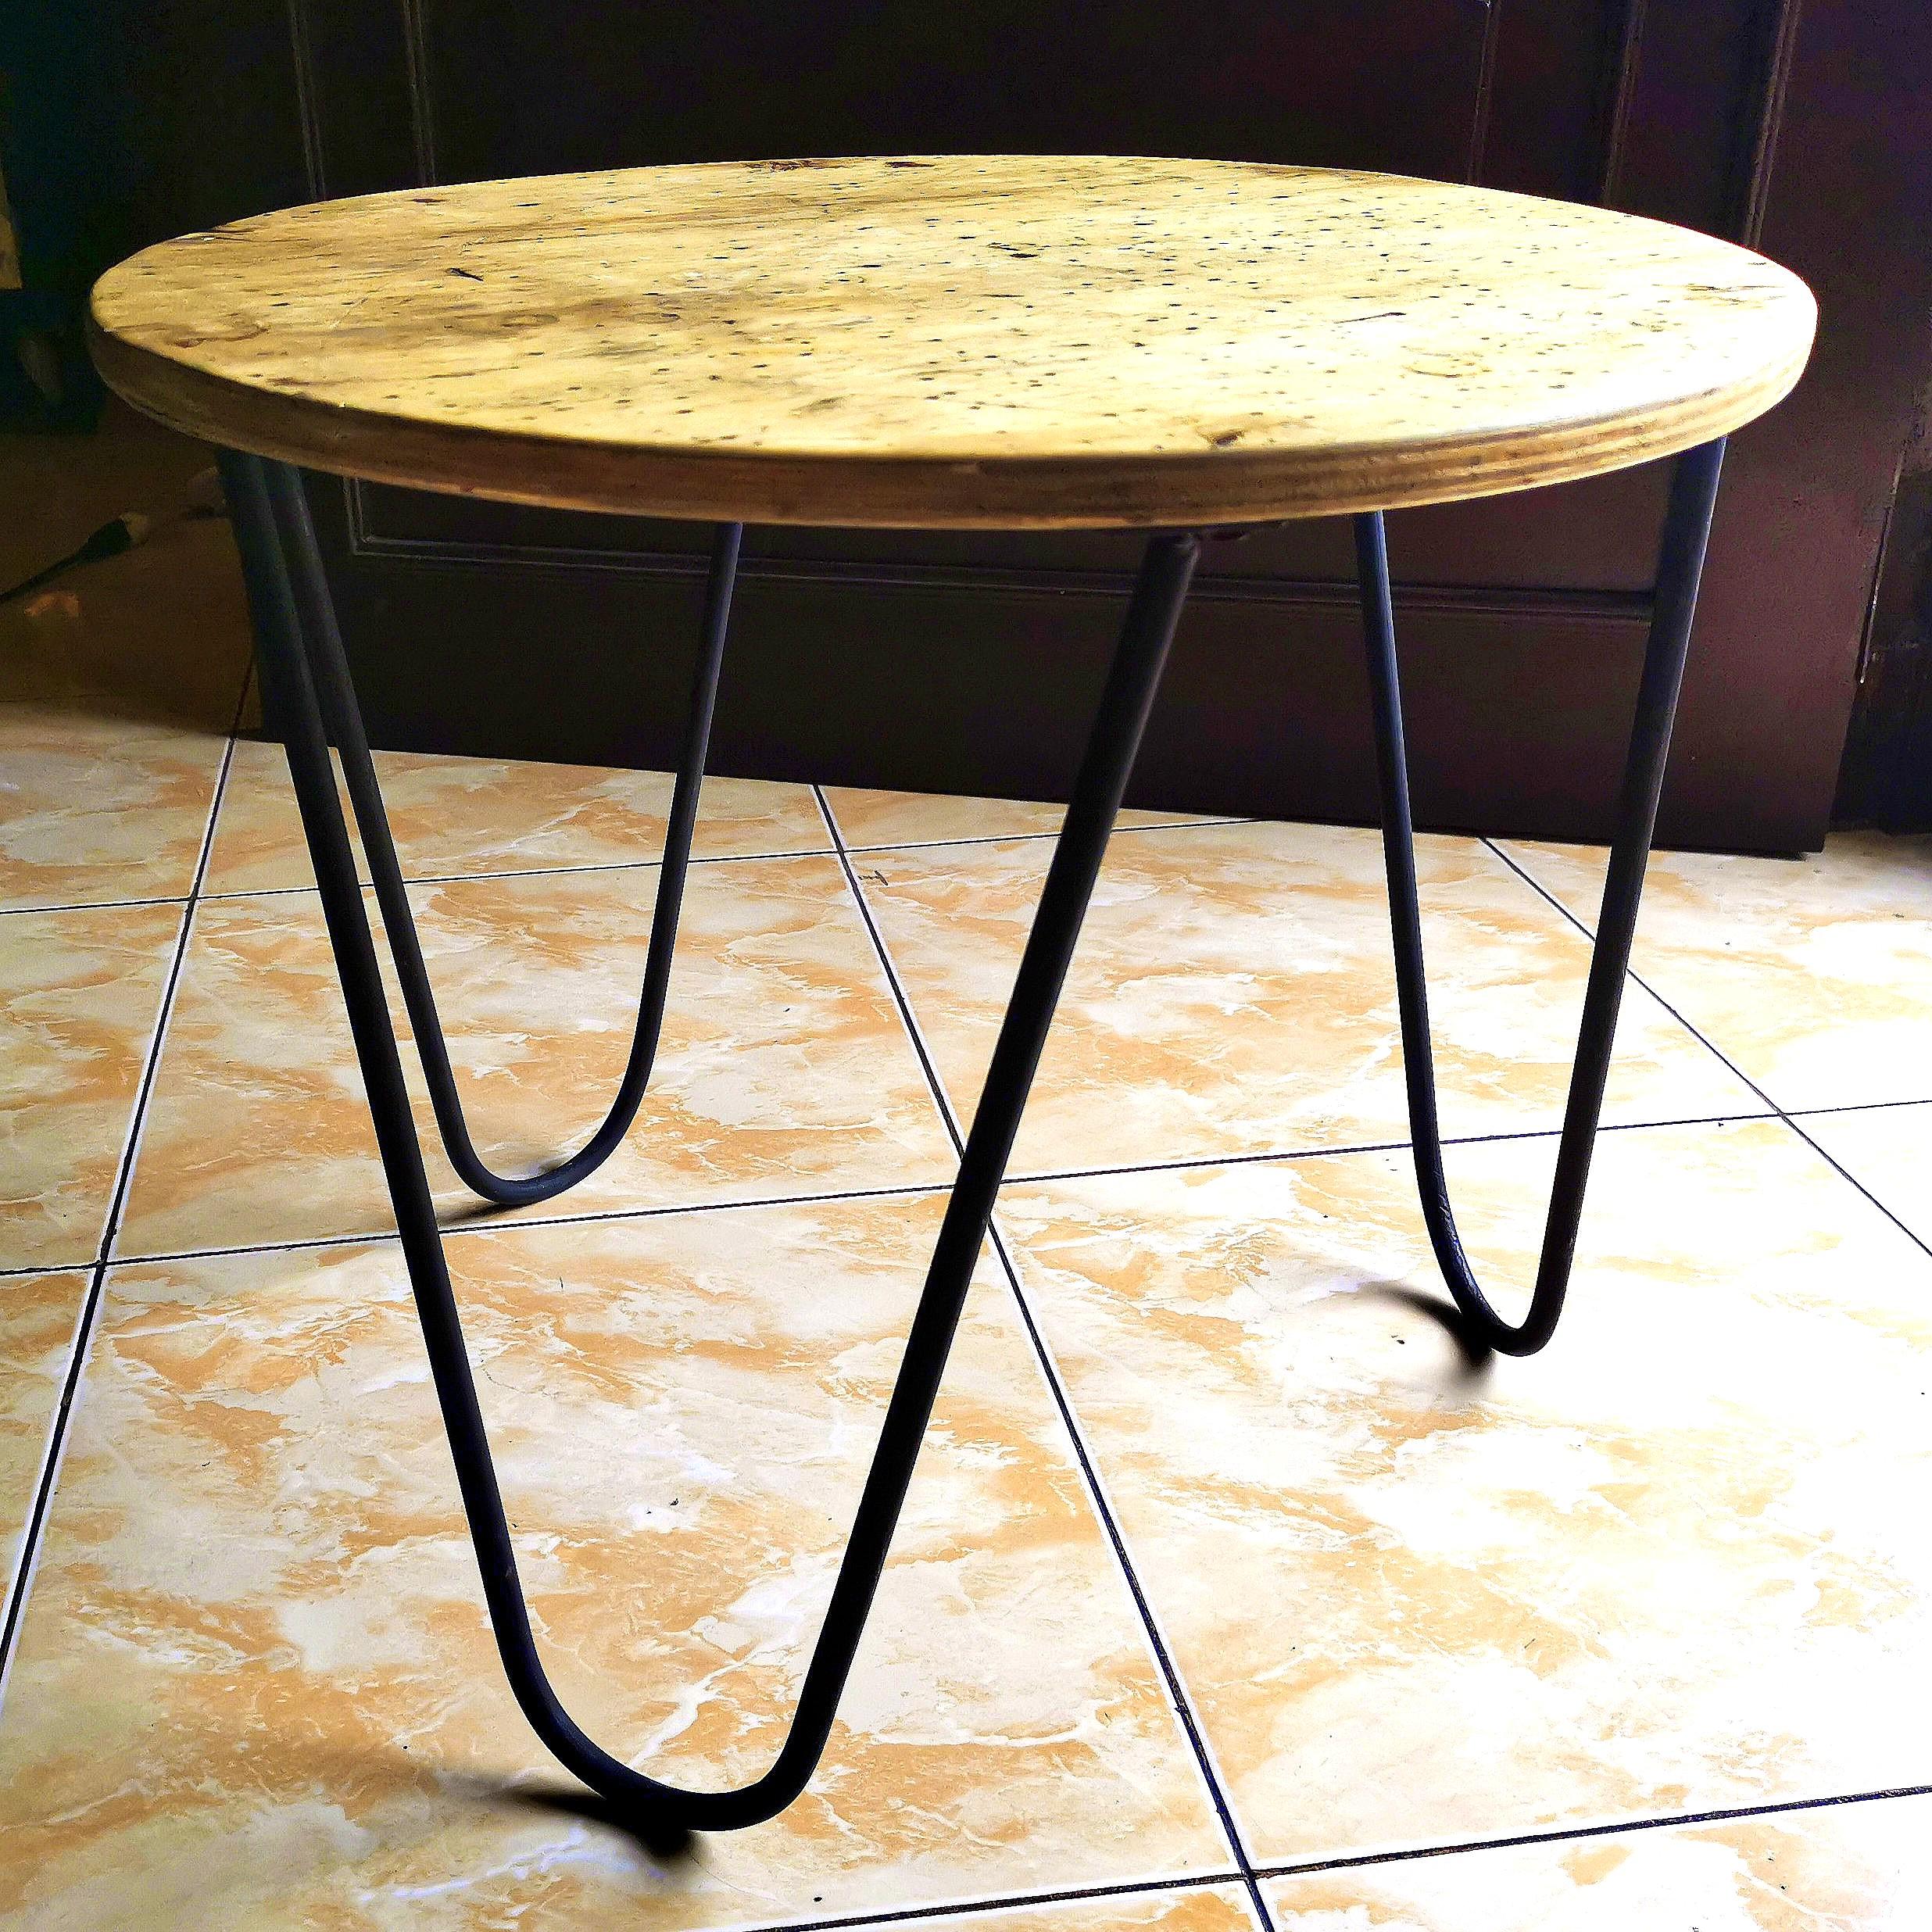 Round Wooden Coffee Table With Steel Legs / 51 Round Coffee Tables To